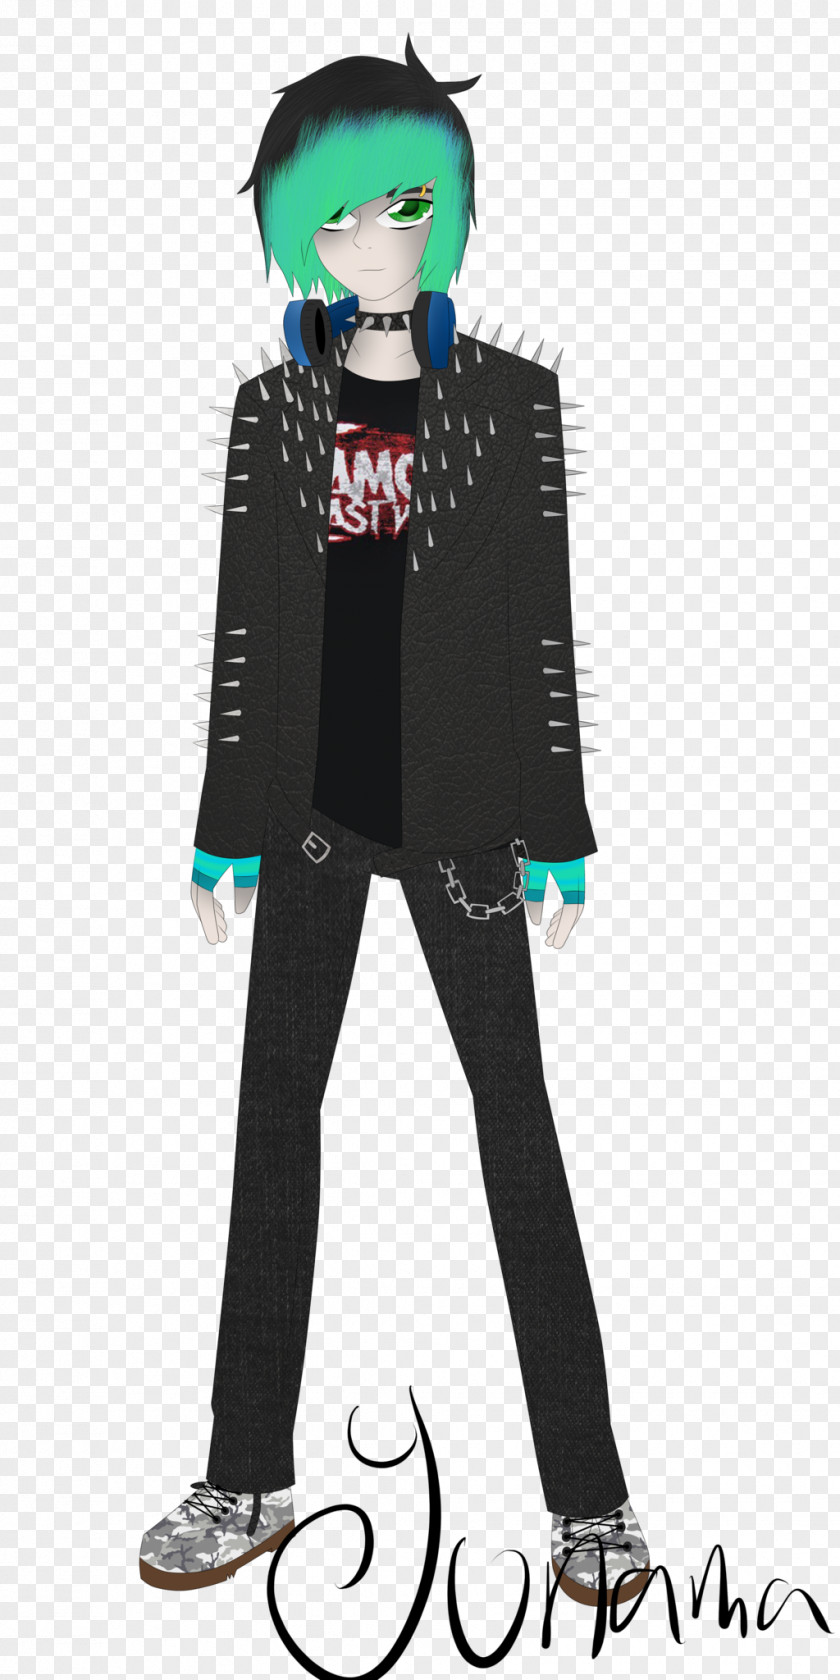 Neverwinther Concept Character Costume Design Outerwear PNG